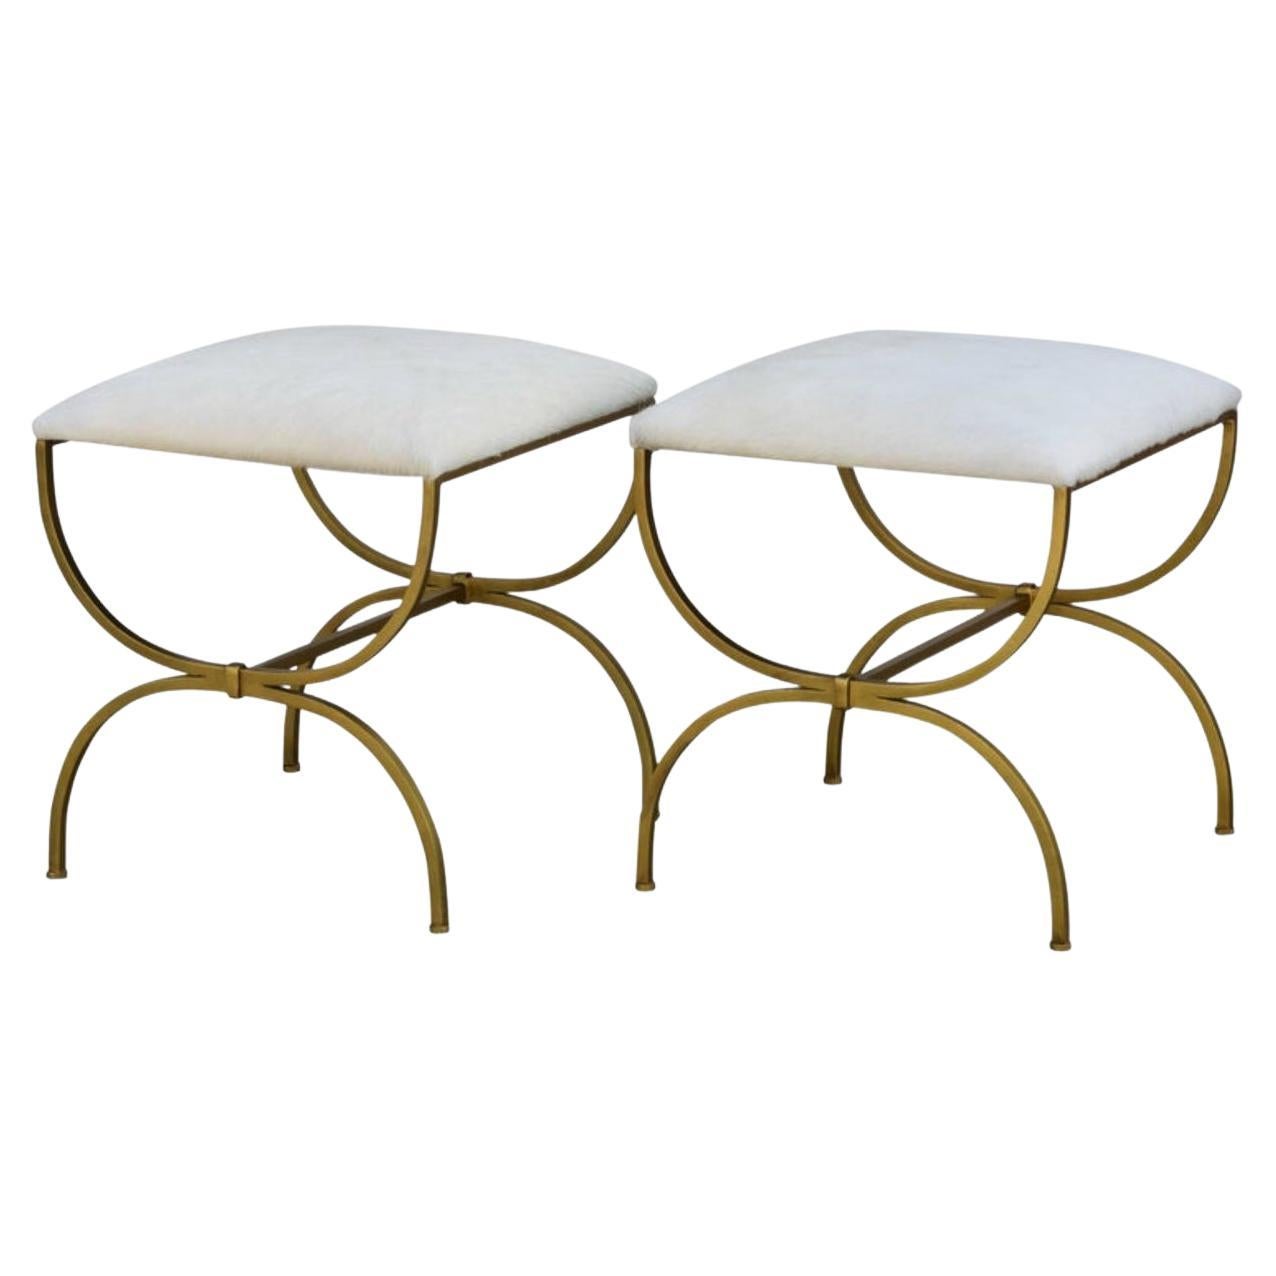 Pair of Gilt Wrought Iron and Hide Stools by Design Frères